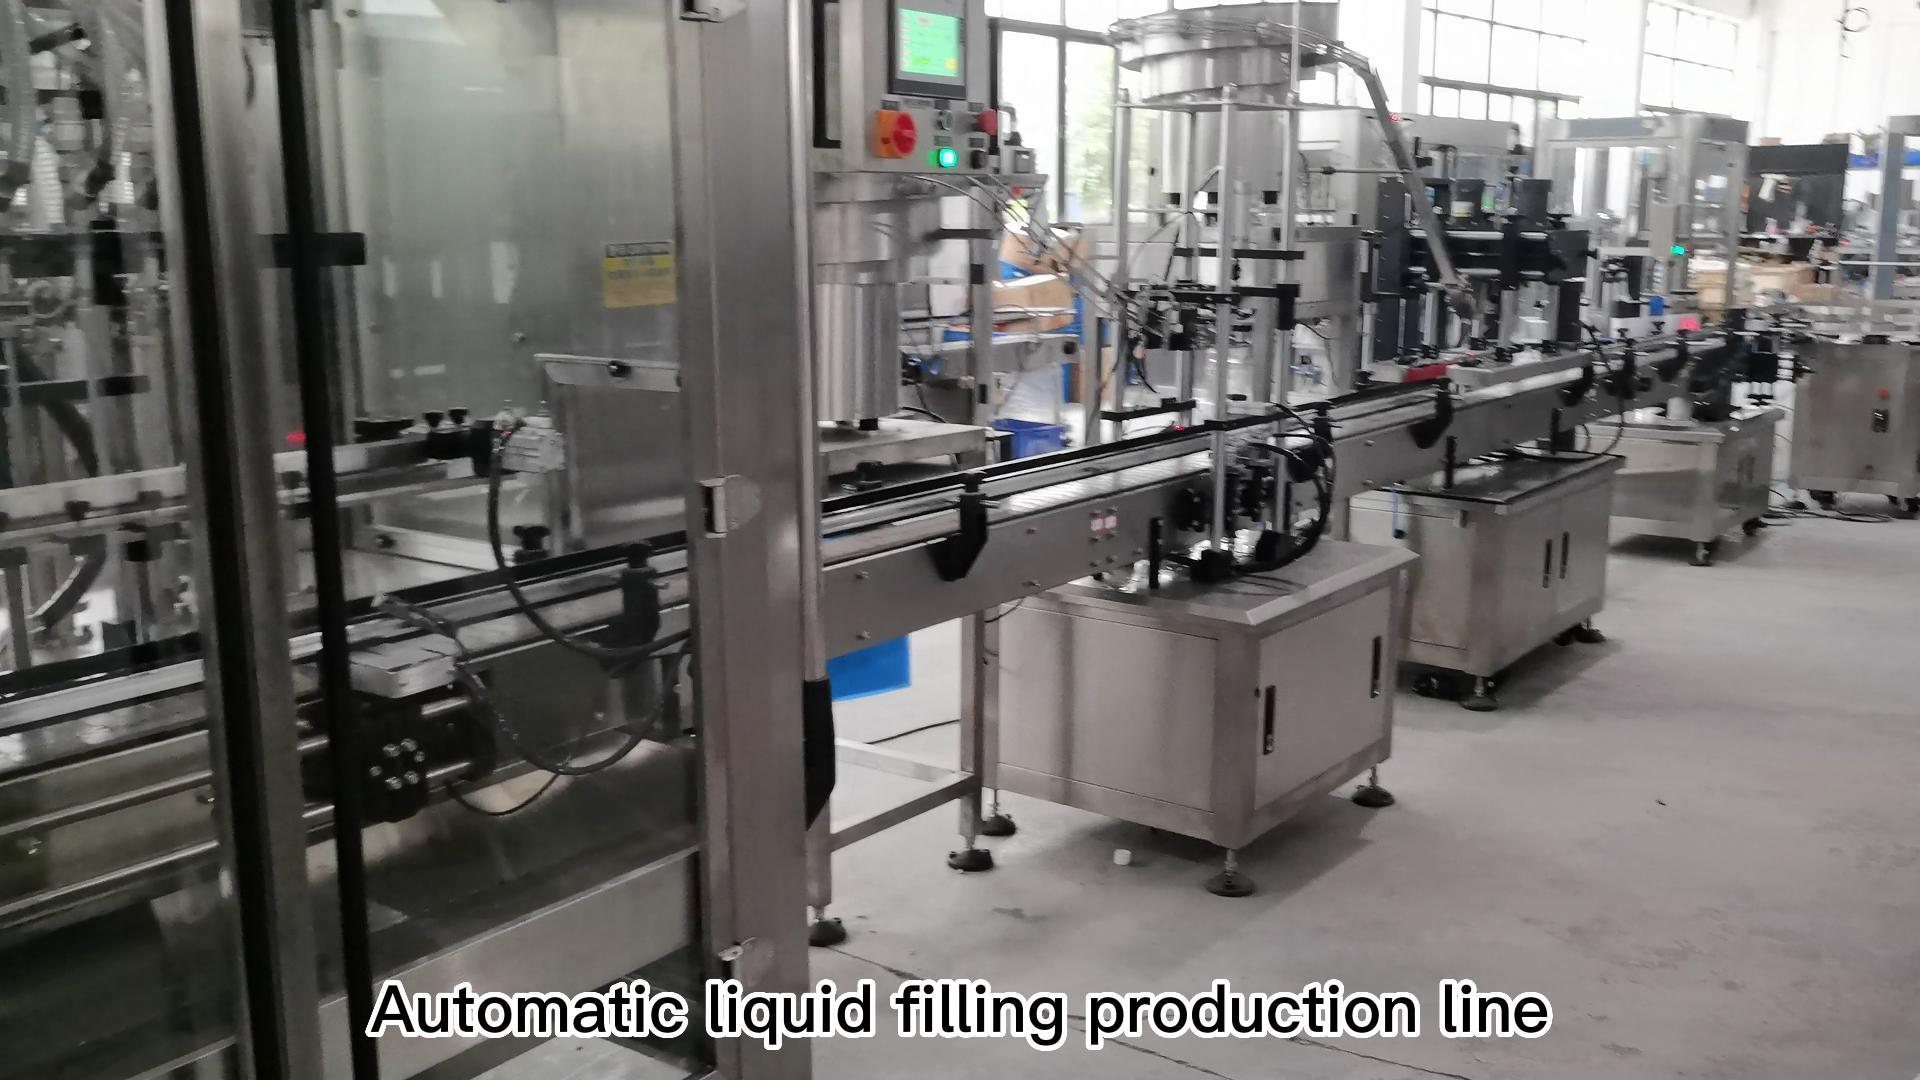 The third test of liquid filling production line